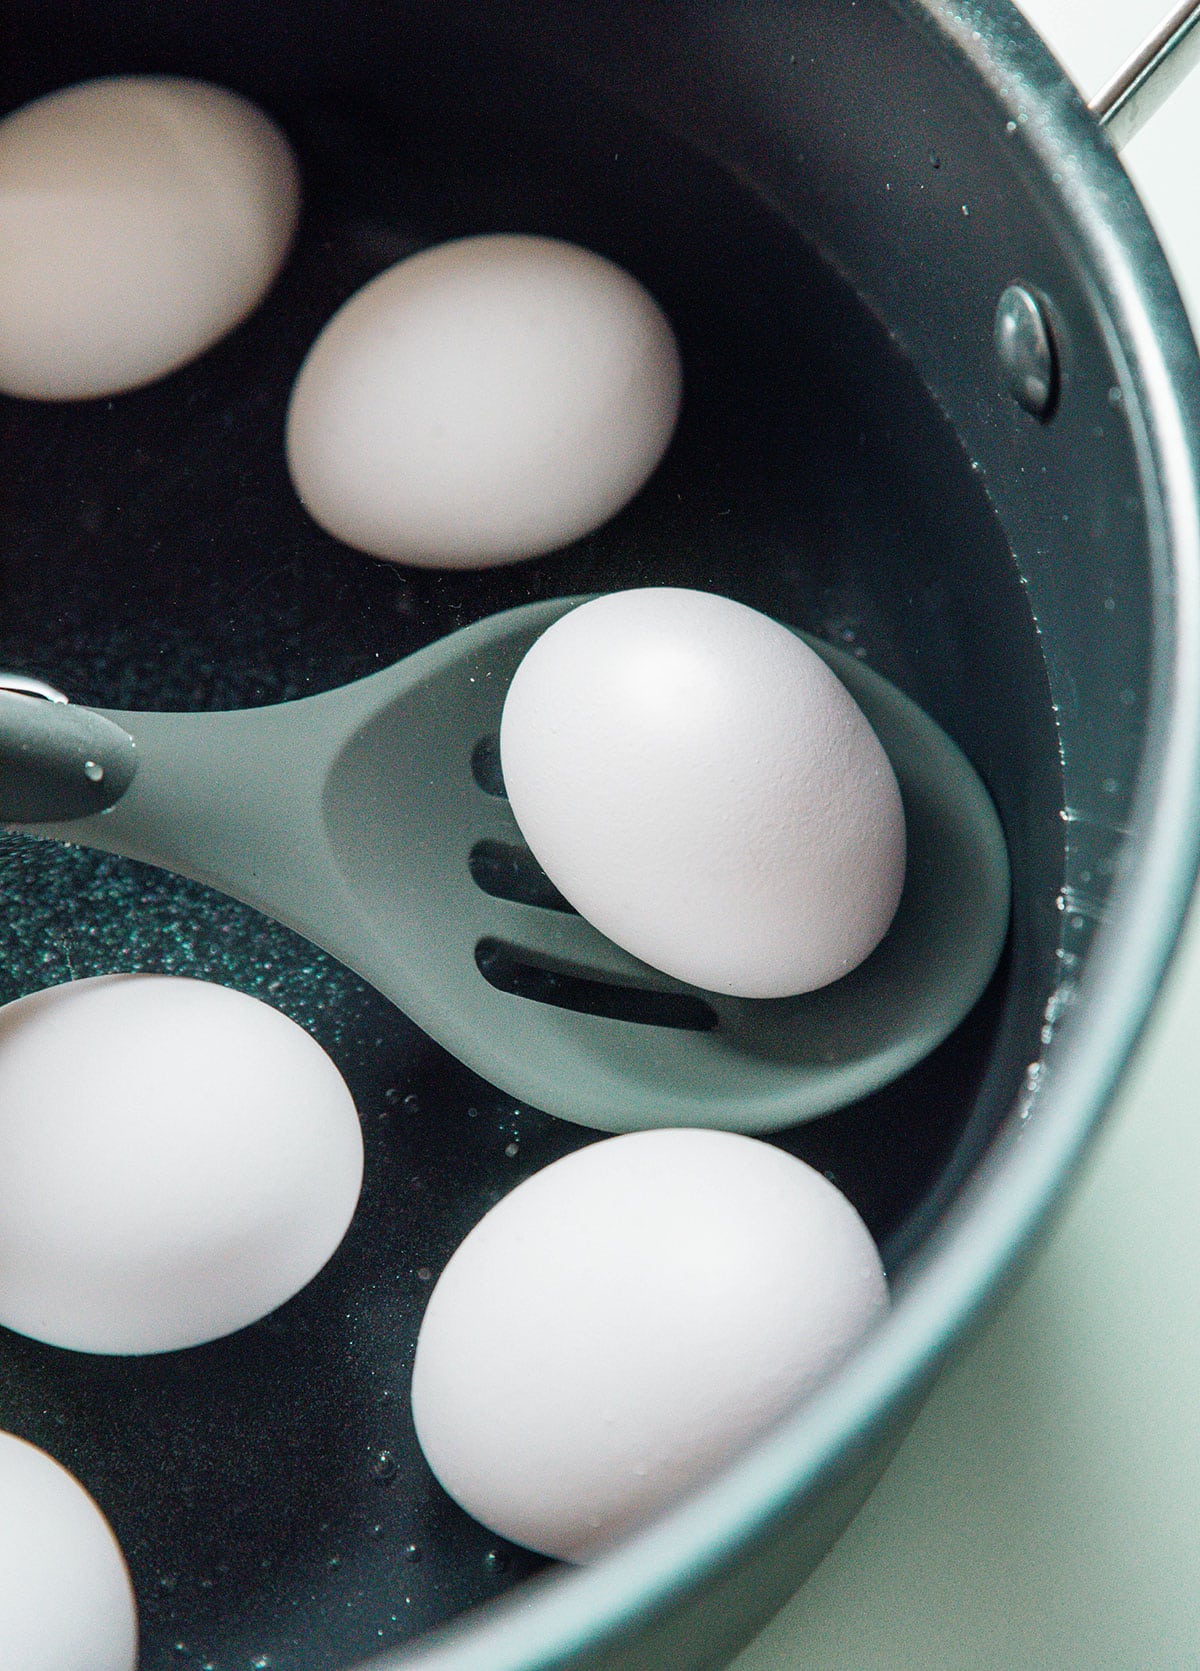 A slotted spoon removing boiled eggs from a pot of water.